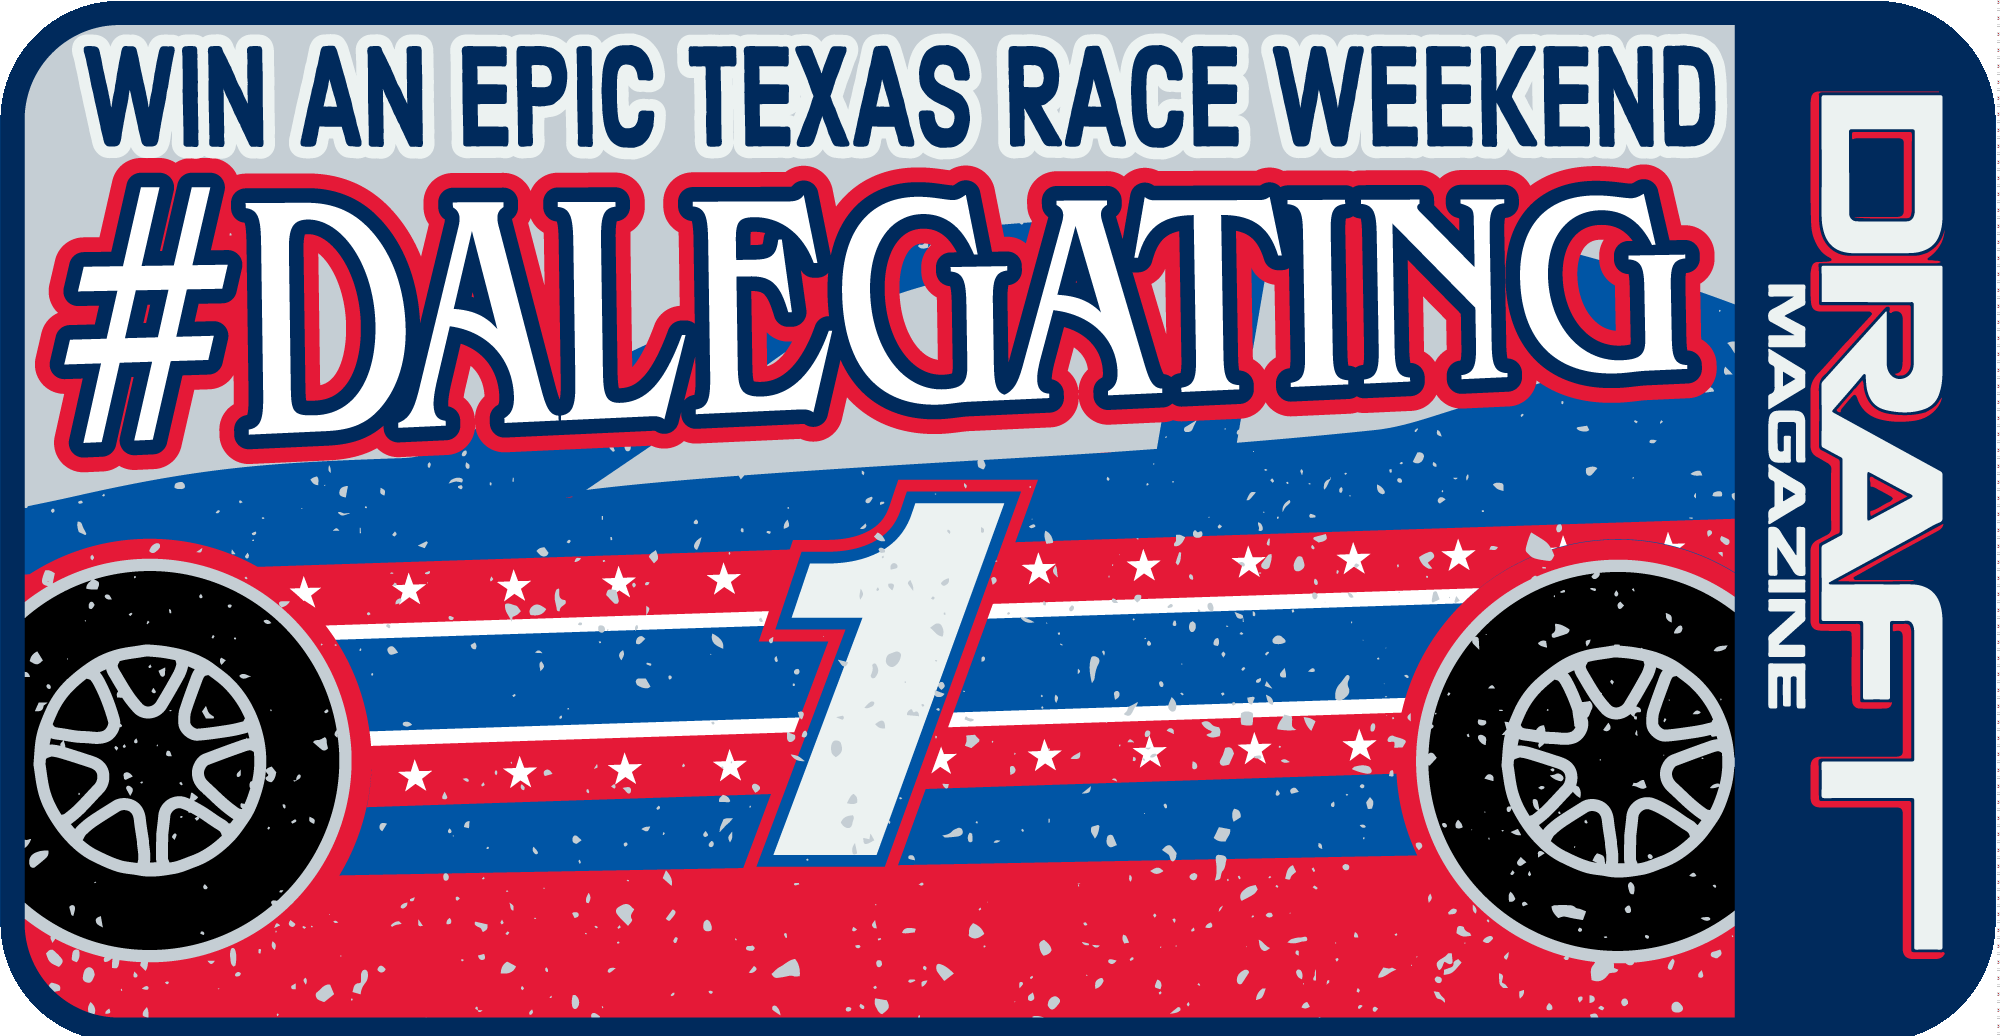 Dalegating is your ticket to the pre and post party. Your pass to the parking lot, where all the magic happens. Join us for an exclusive look at our new Austin brewery and for some great Dalegating fun with the Jr. Motorsports race team at Texas Motor Speedway!